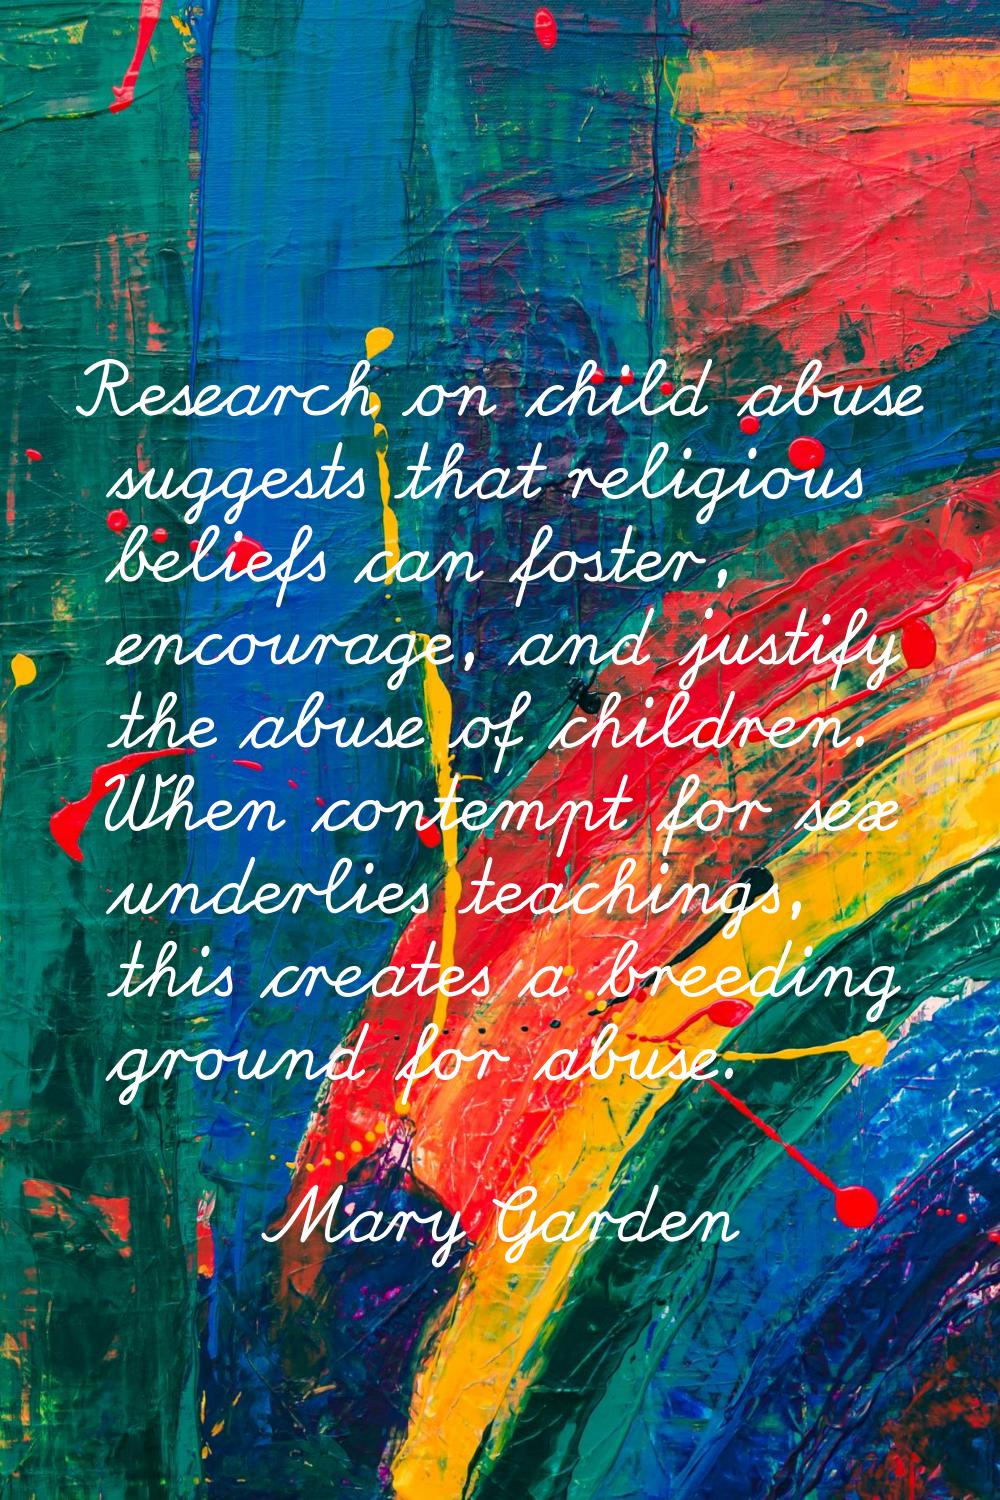 Research on child abuse suggests that religious beliefs can foster, encourage, and justify the abus